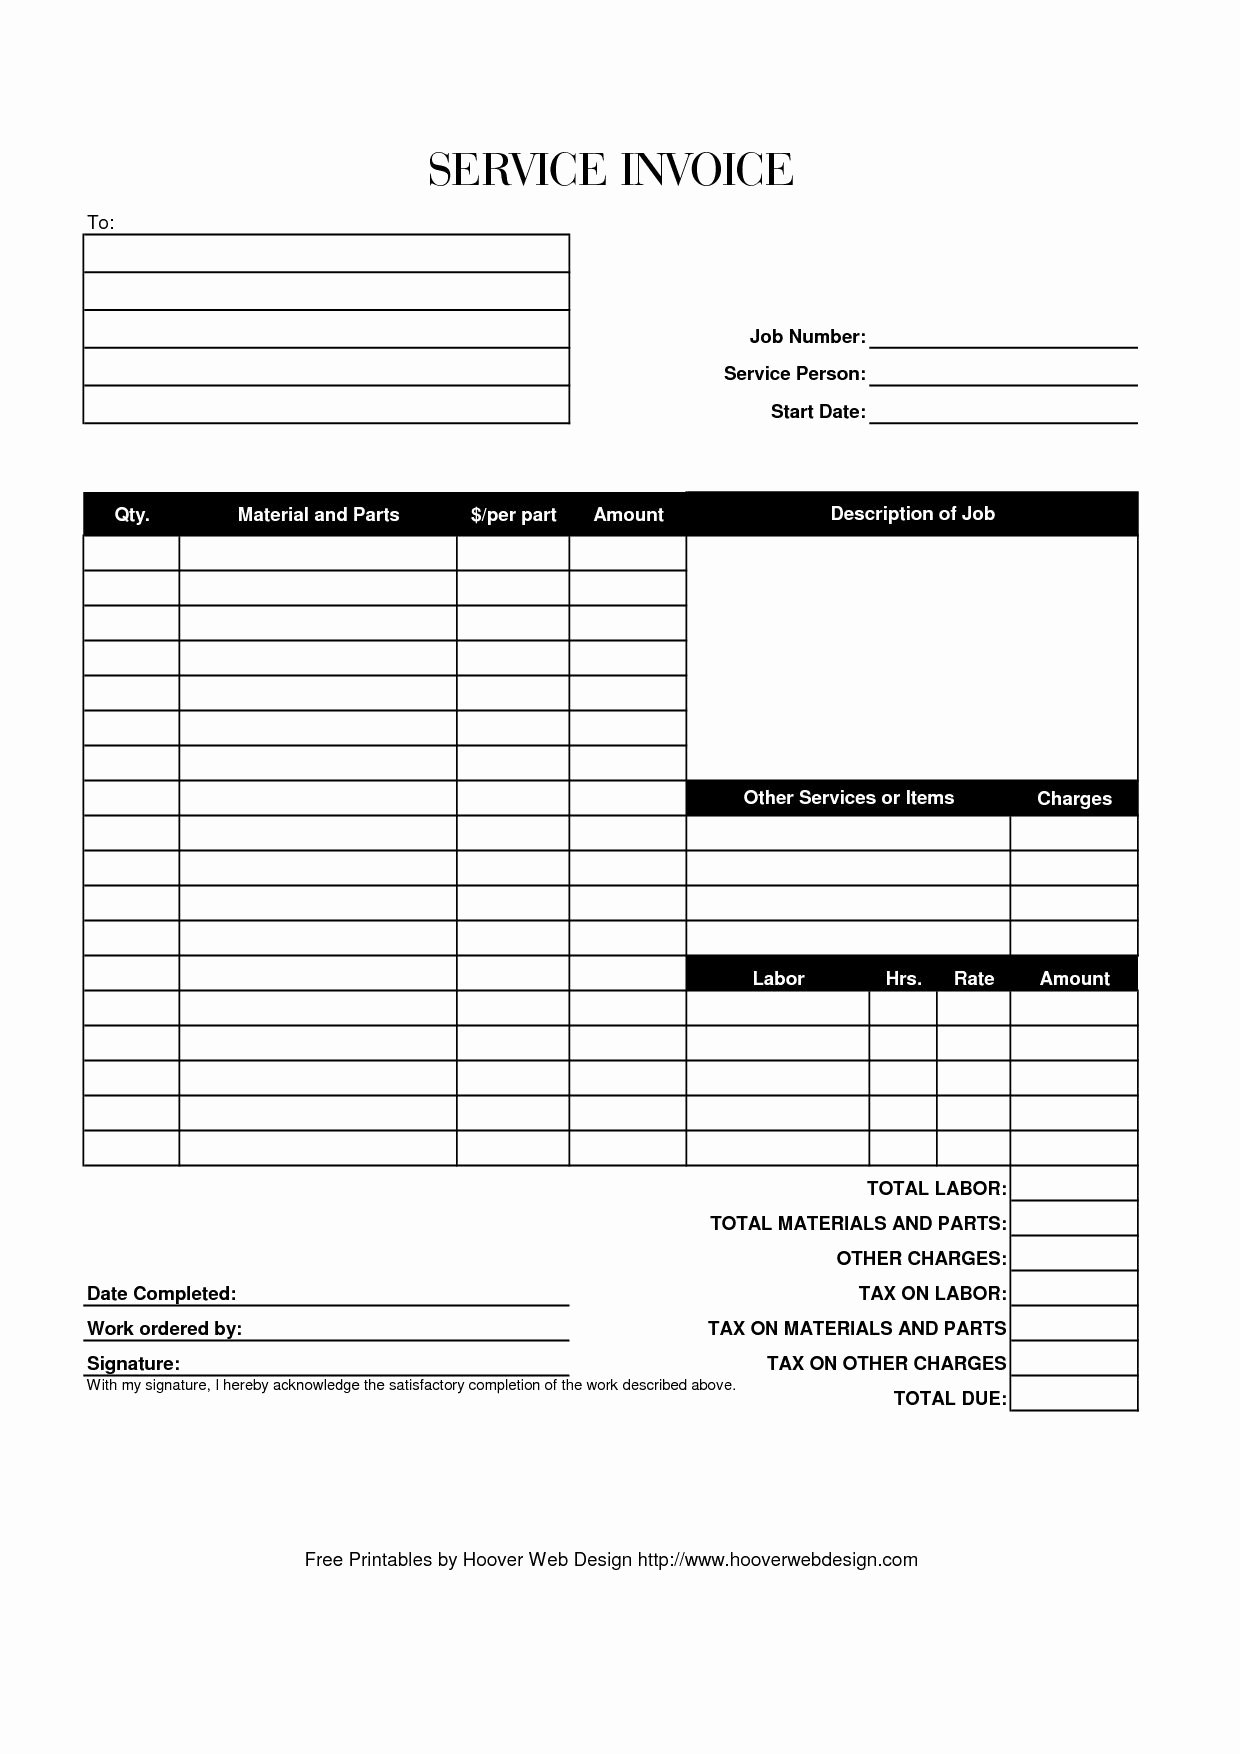 Blank Invoice Template Free Lovely Blank Service Invoice Blank Invoice Blank Service Invoice